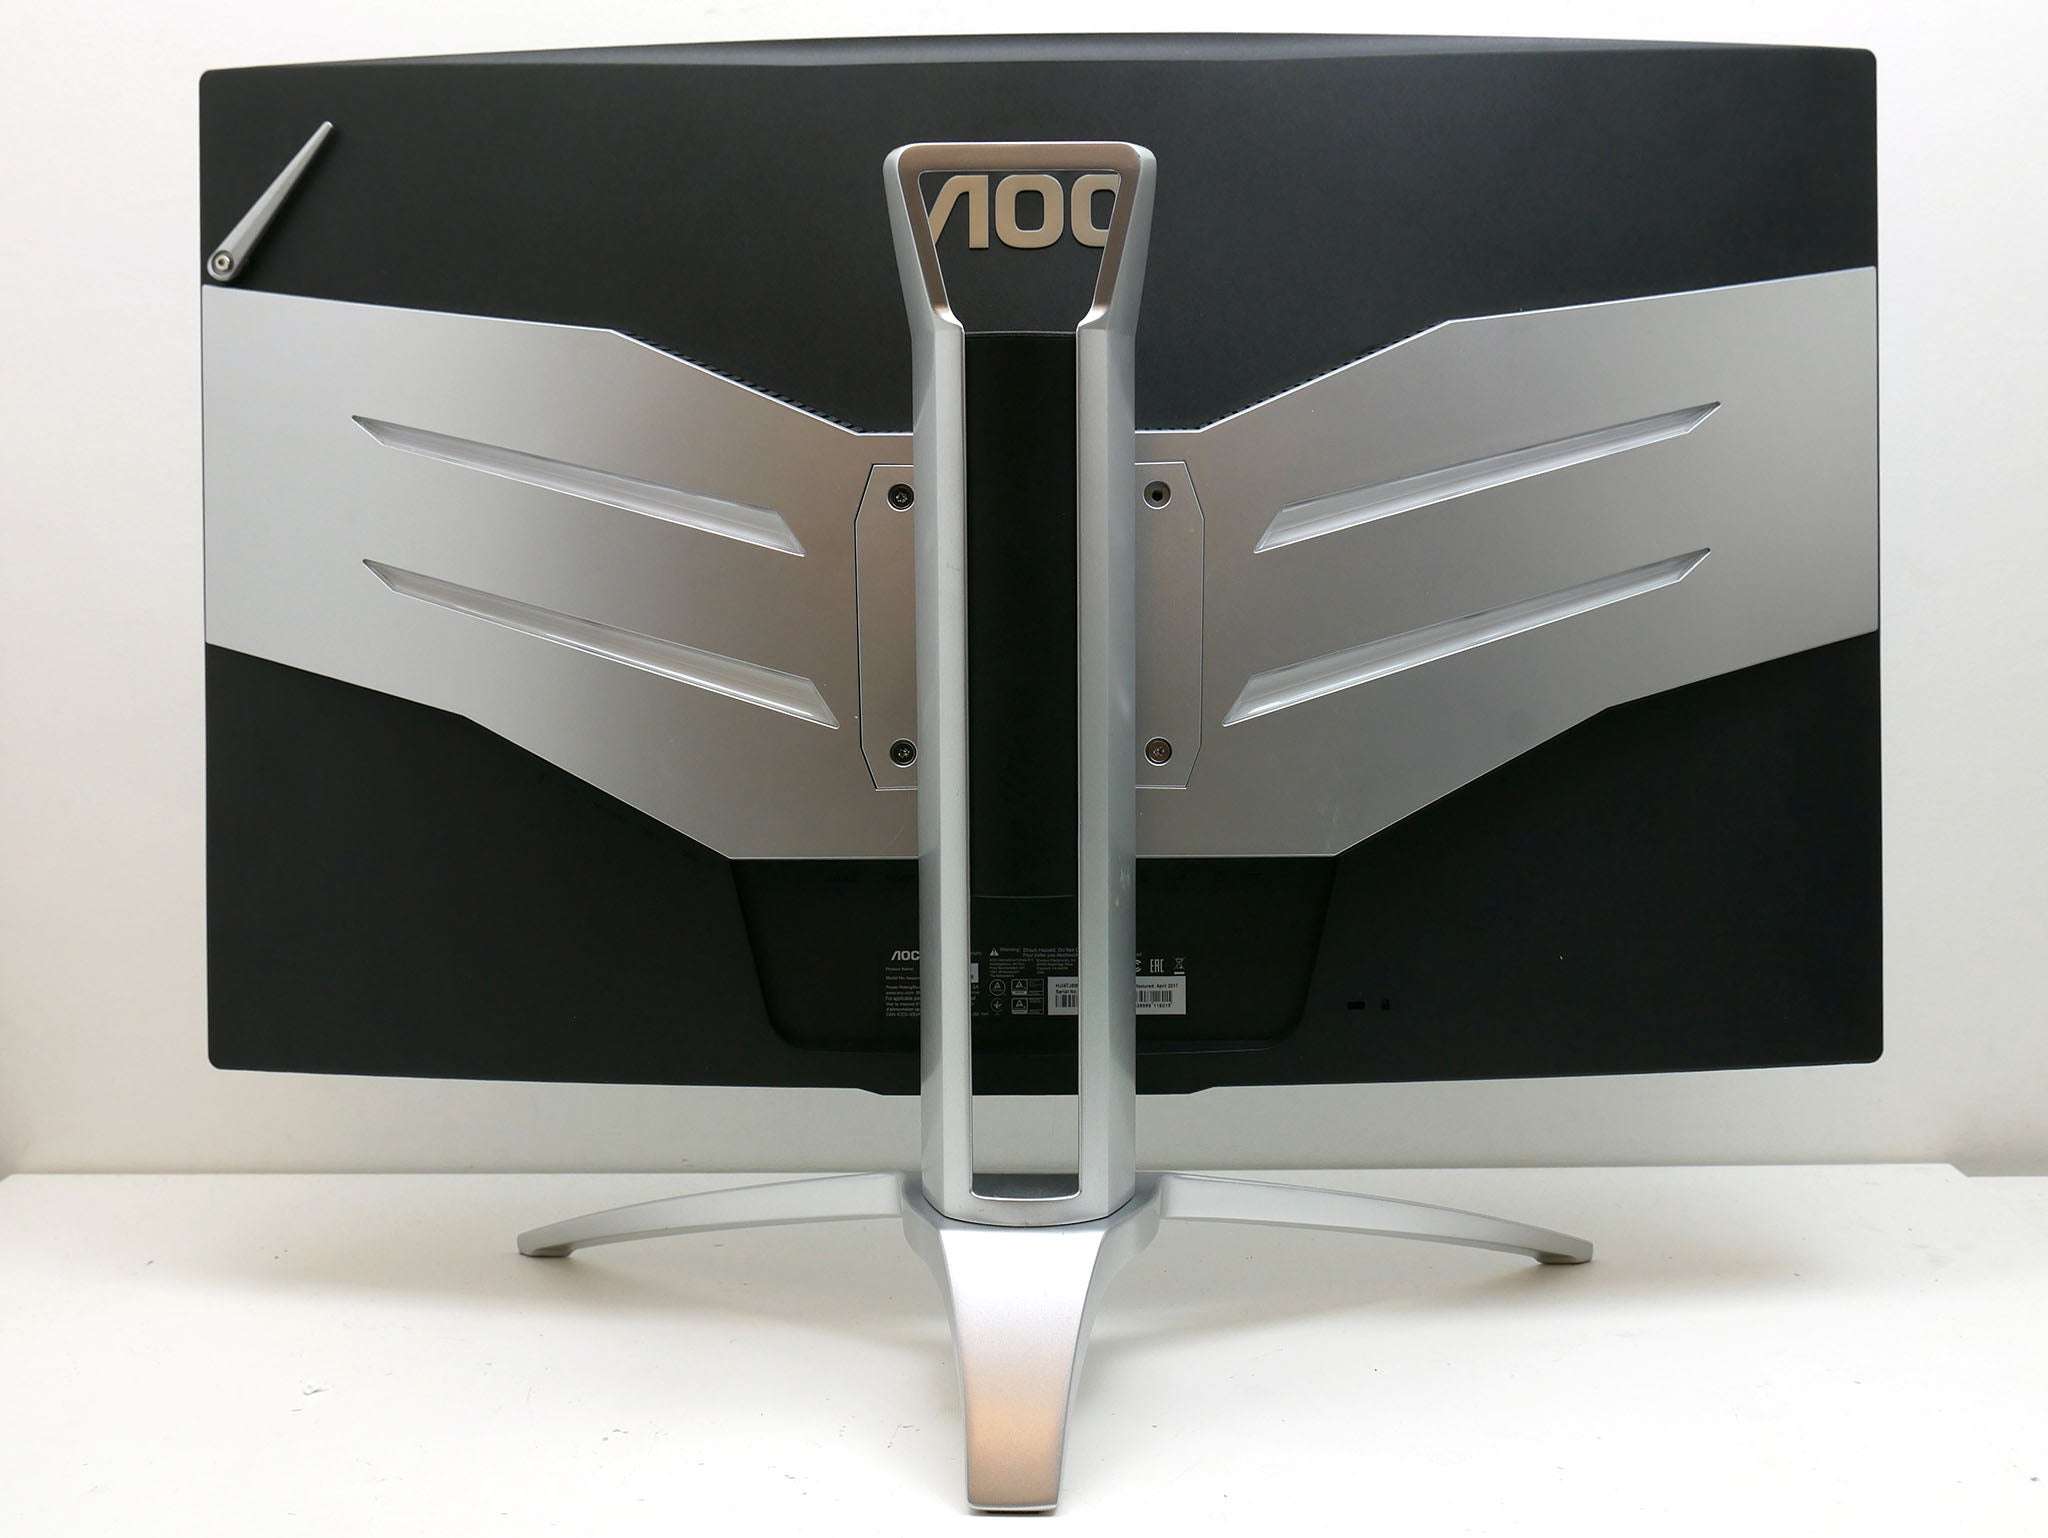 AOC AG322QCX gaming monitor back view showing stand design.